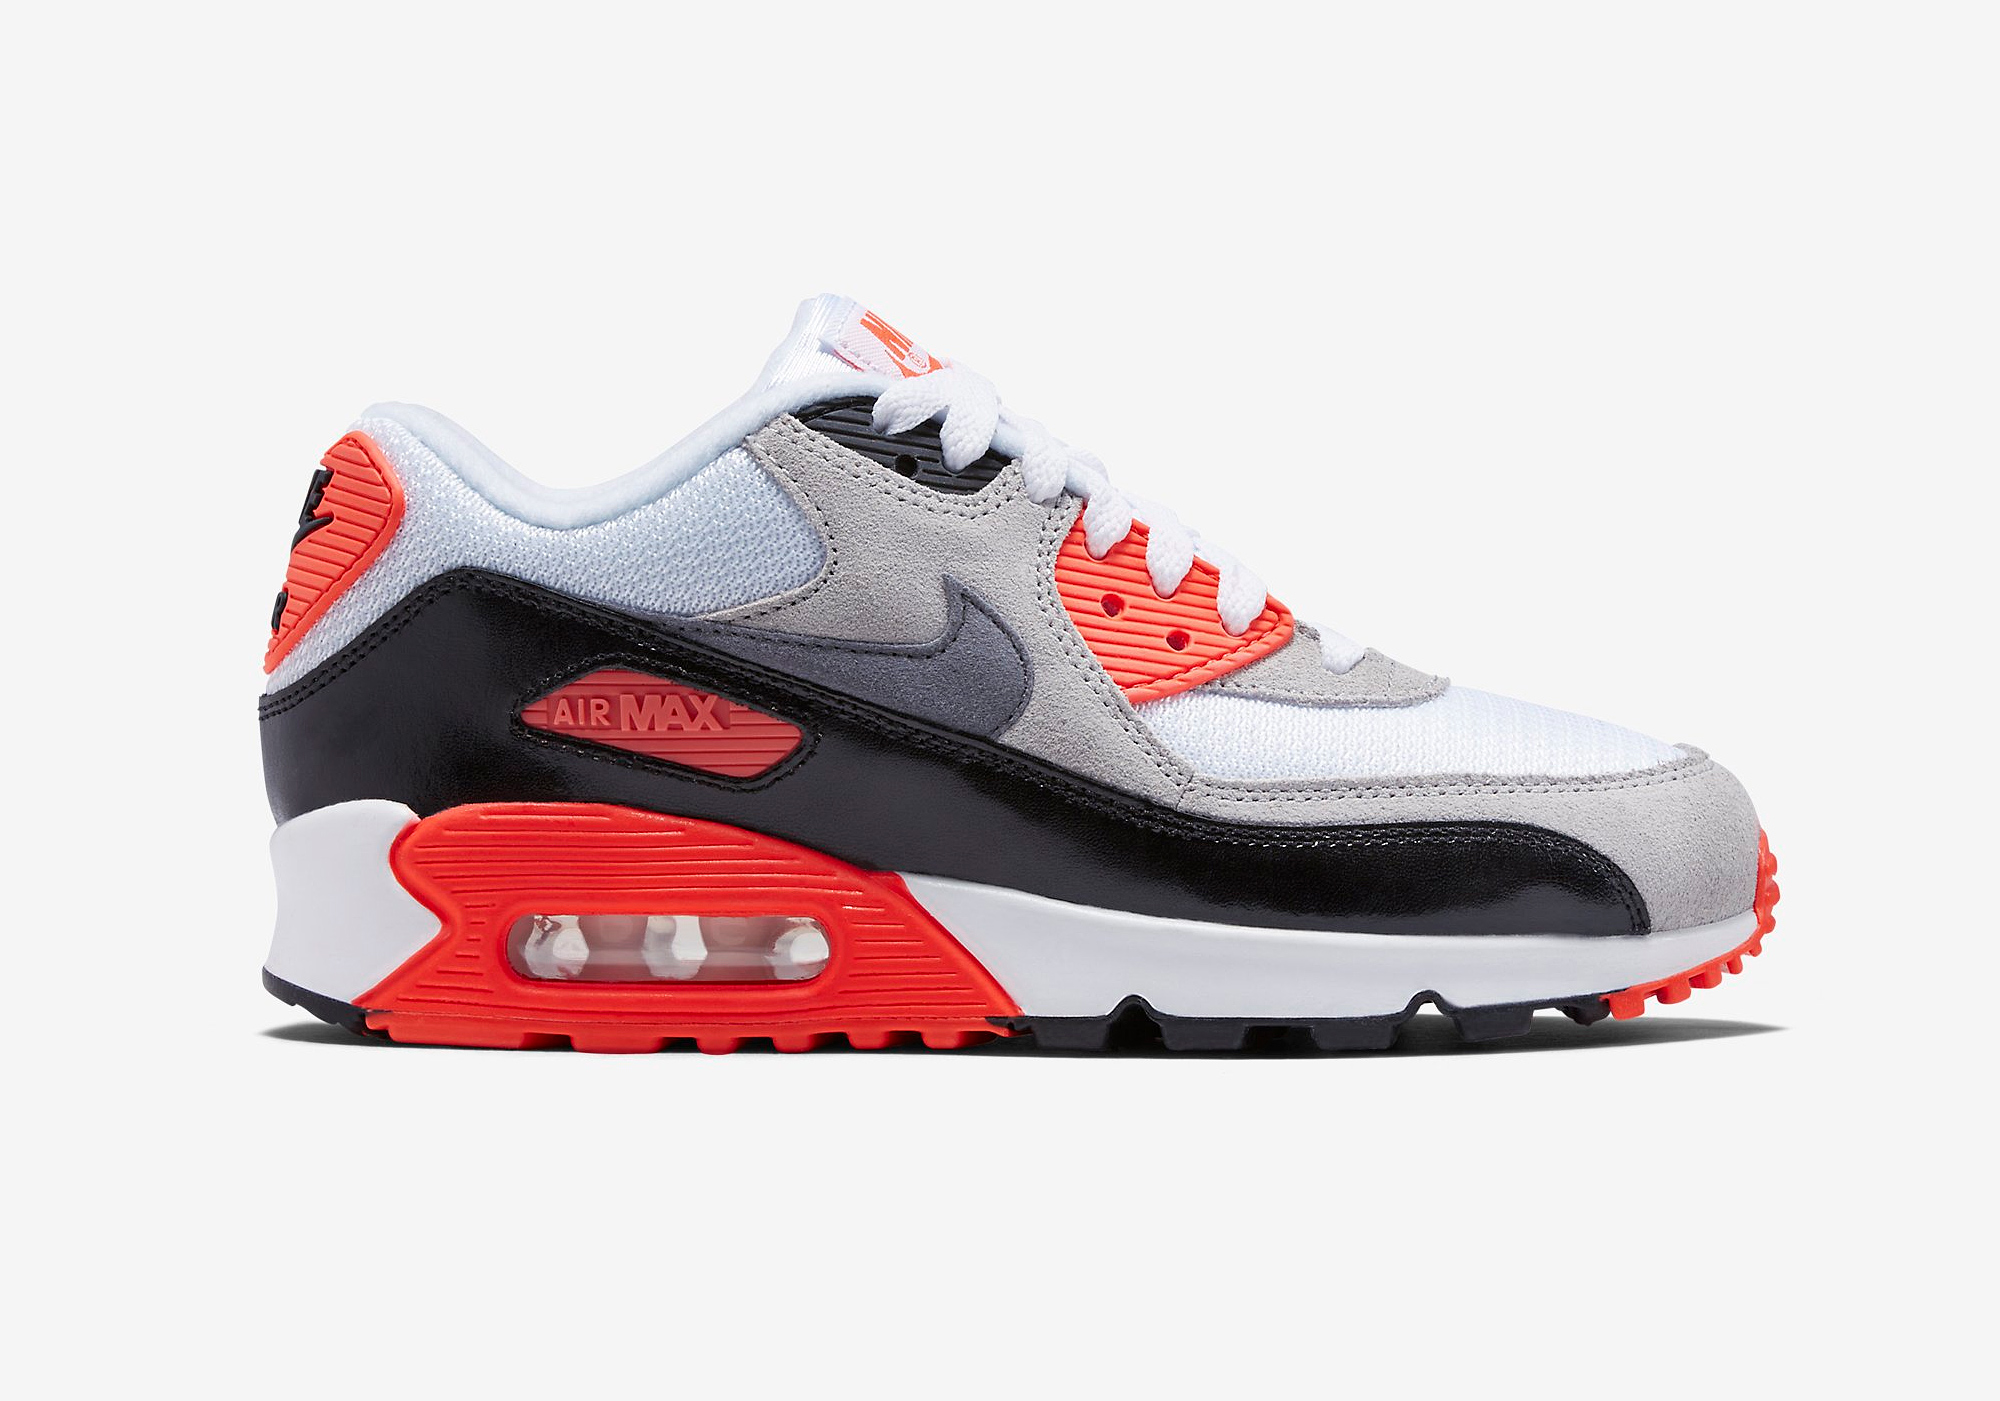 Nike Air Max 90 "Black/Red" Release Details